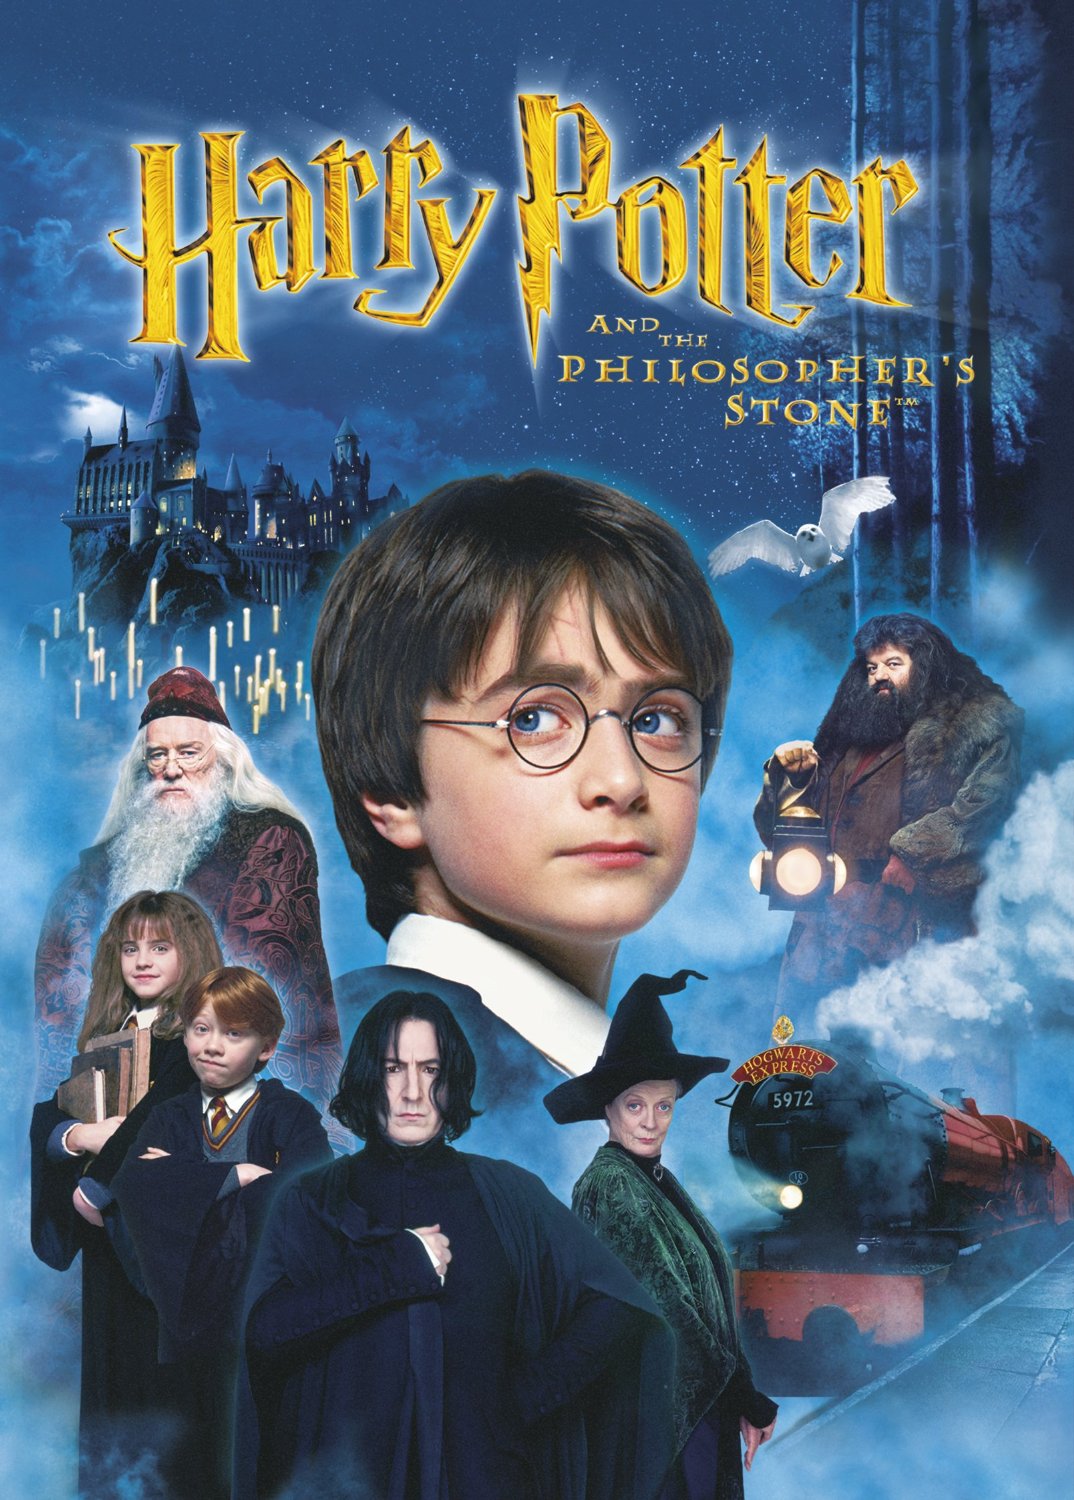 Harry Potter And The Philosopher's Stone #2